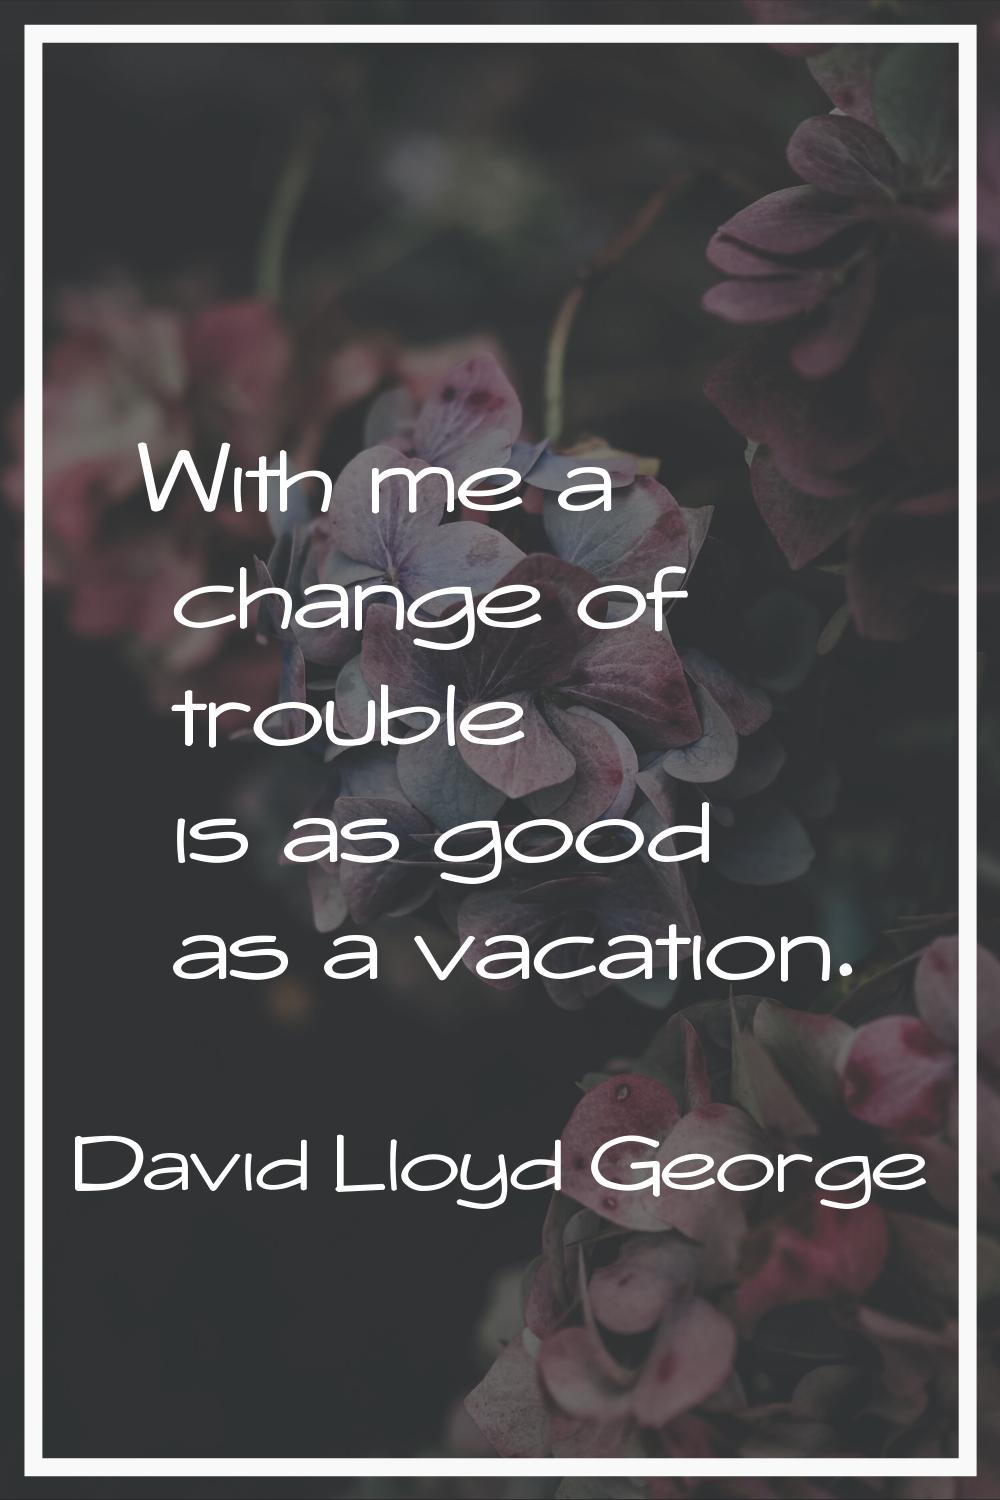 With me a change of trouble is as good as a vacation.